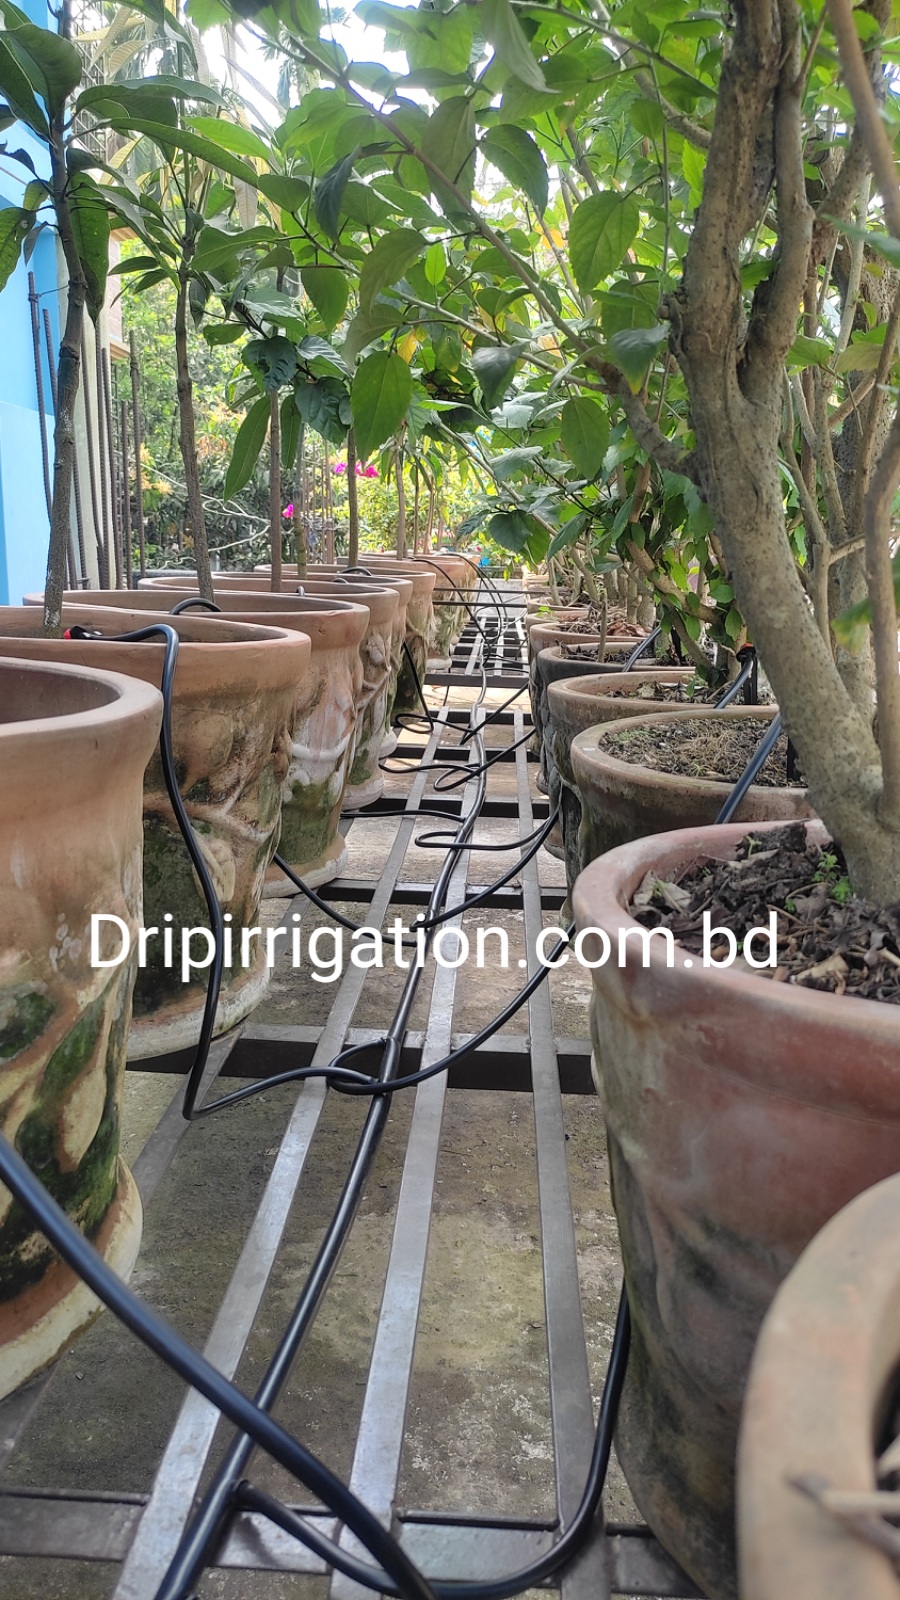 20 plants drip irrigation package